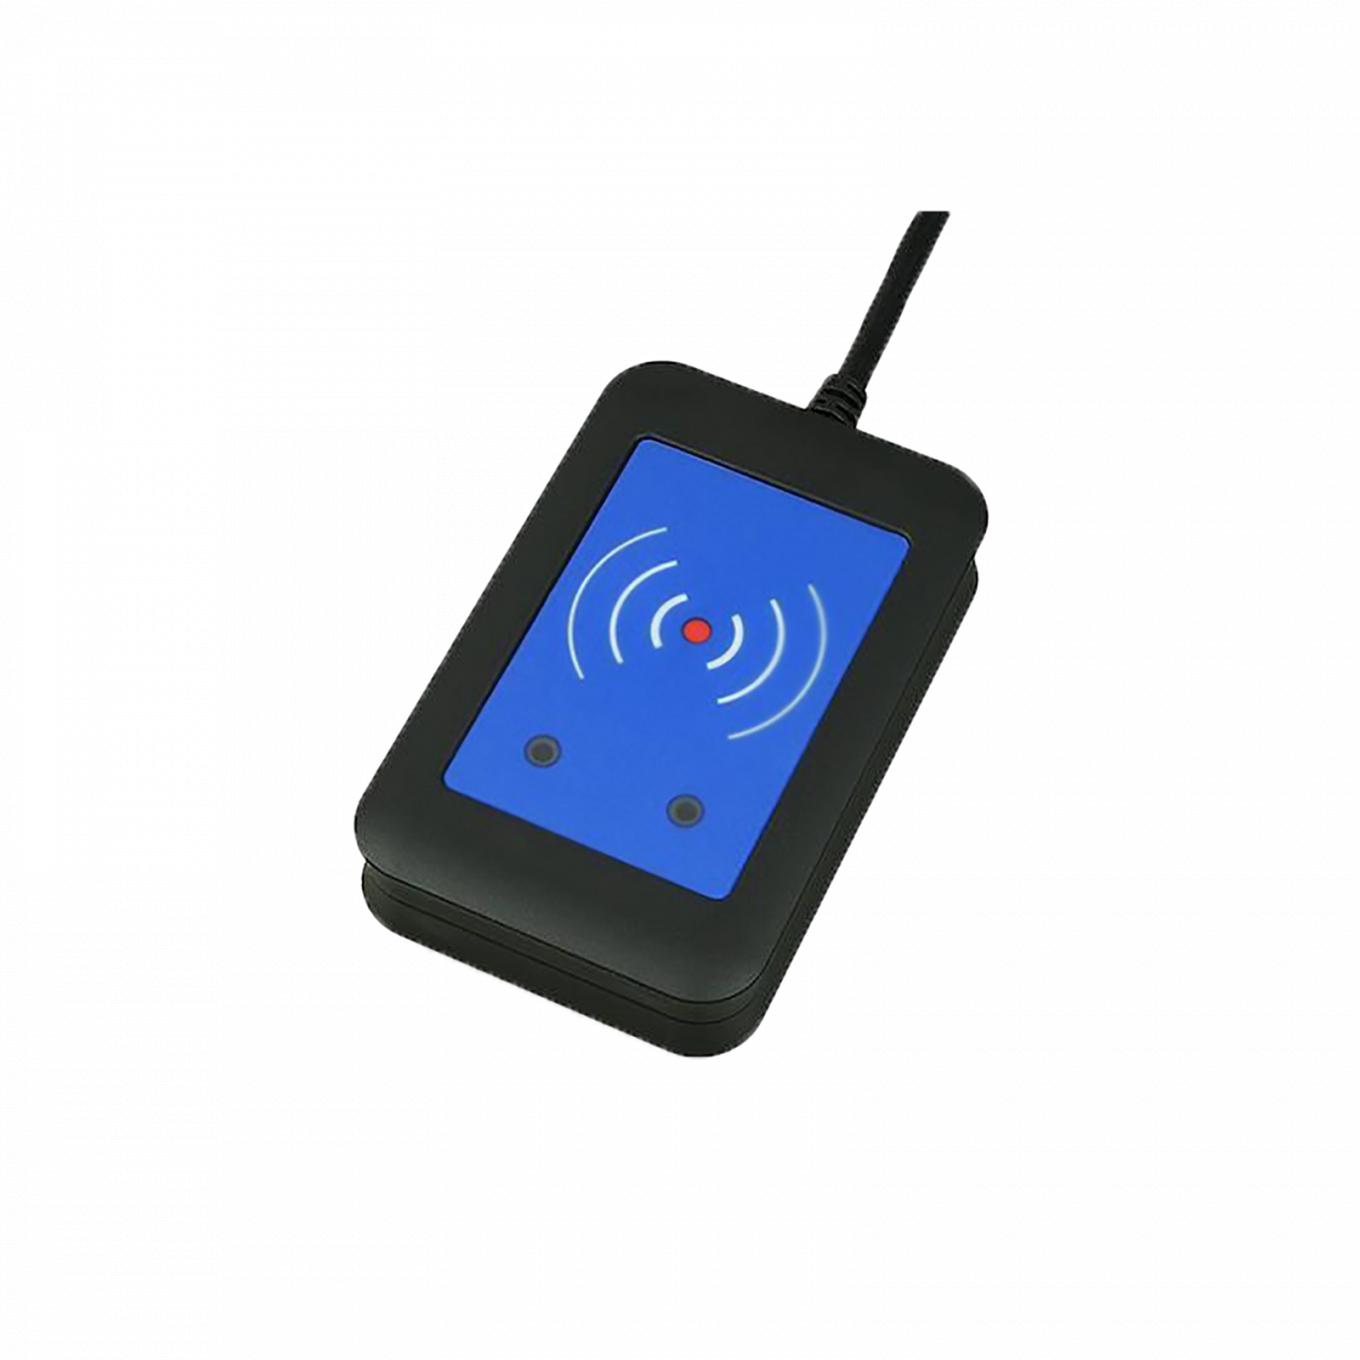 External RFID Secured Reader 13.56 MHz + 125 kHz, USB interface, viewed fromt its front